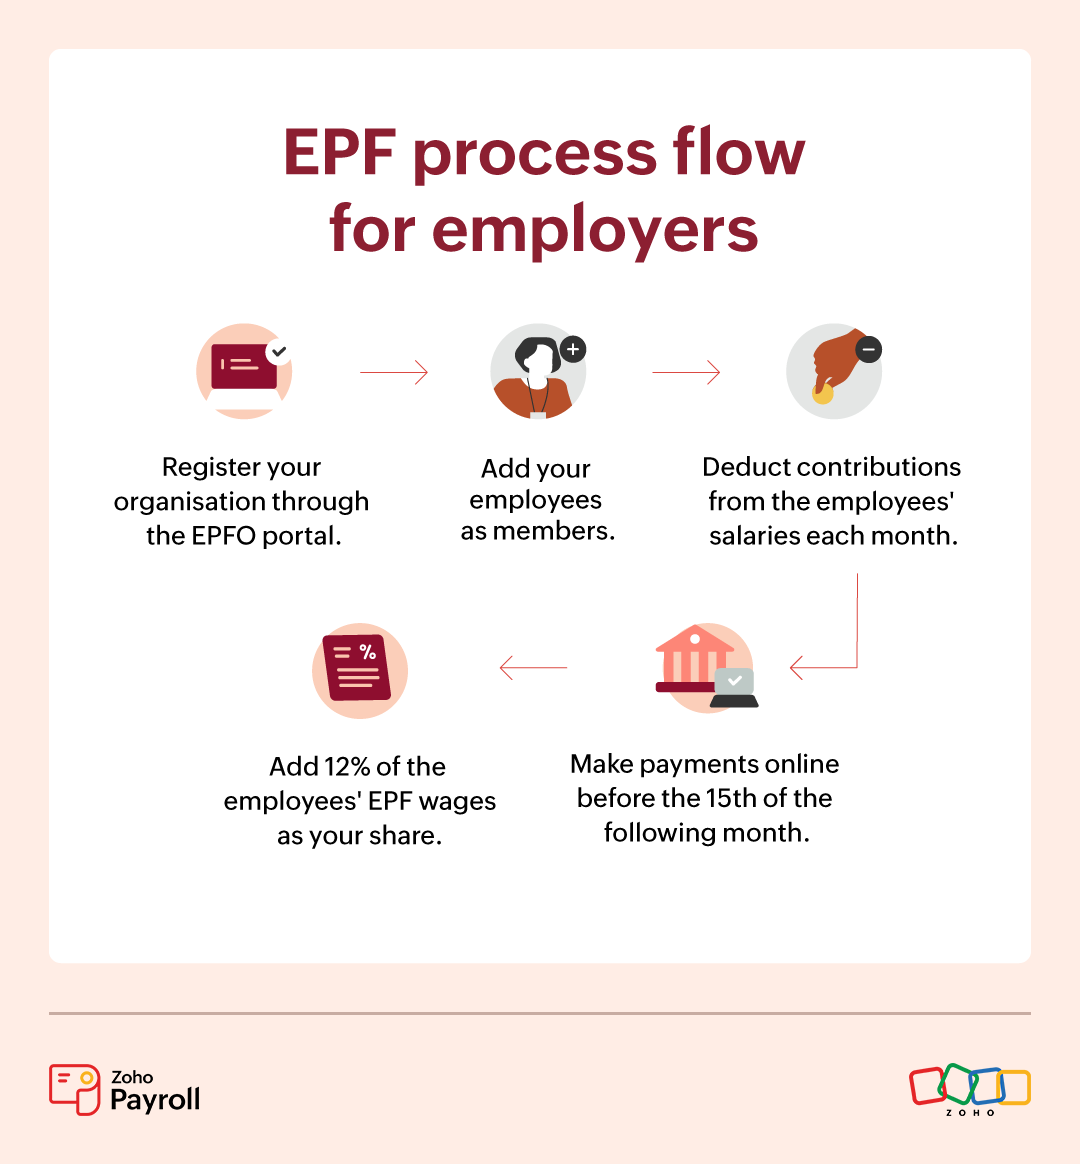 EPF-process-flow-infographic